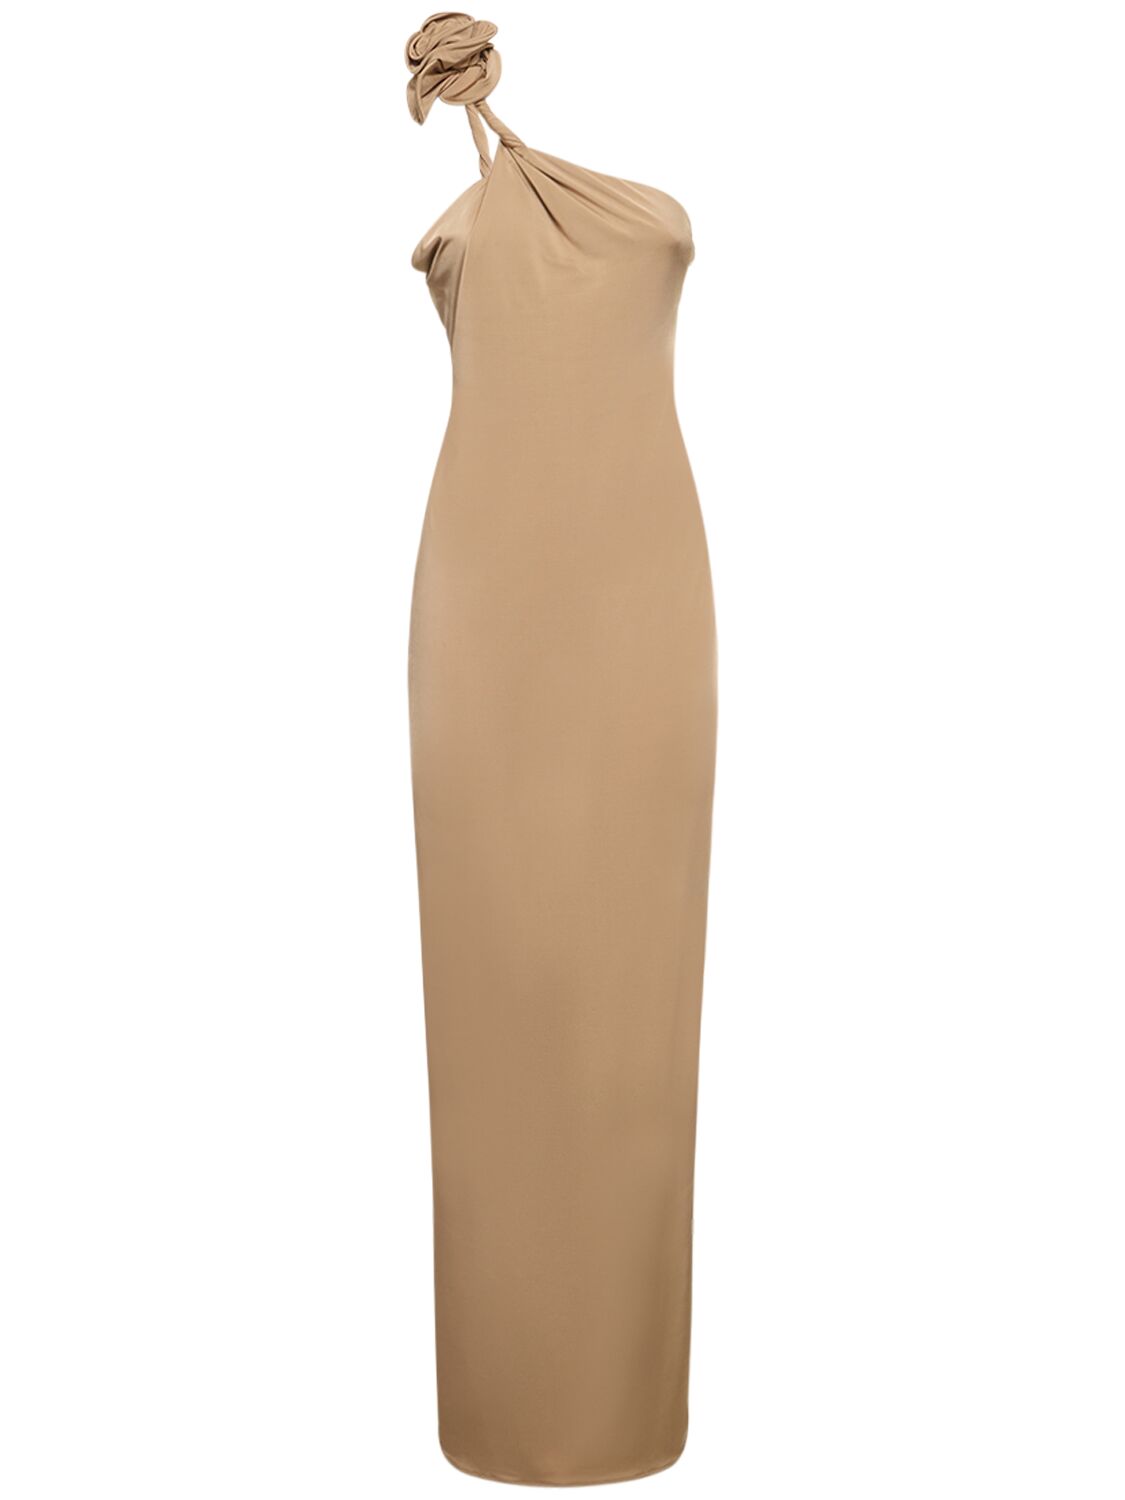 Magda Butrym Floral-detailed Dress In Tan